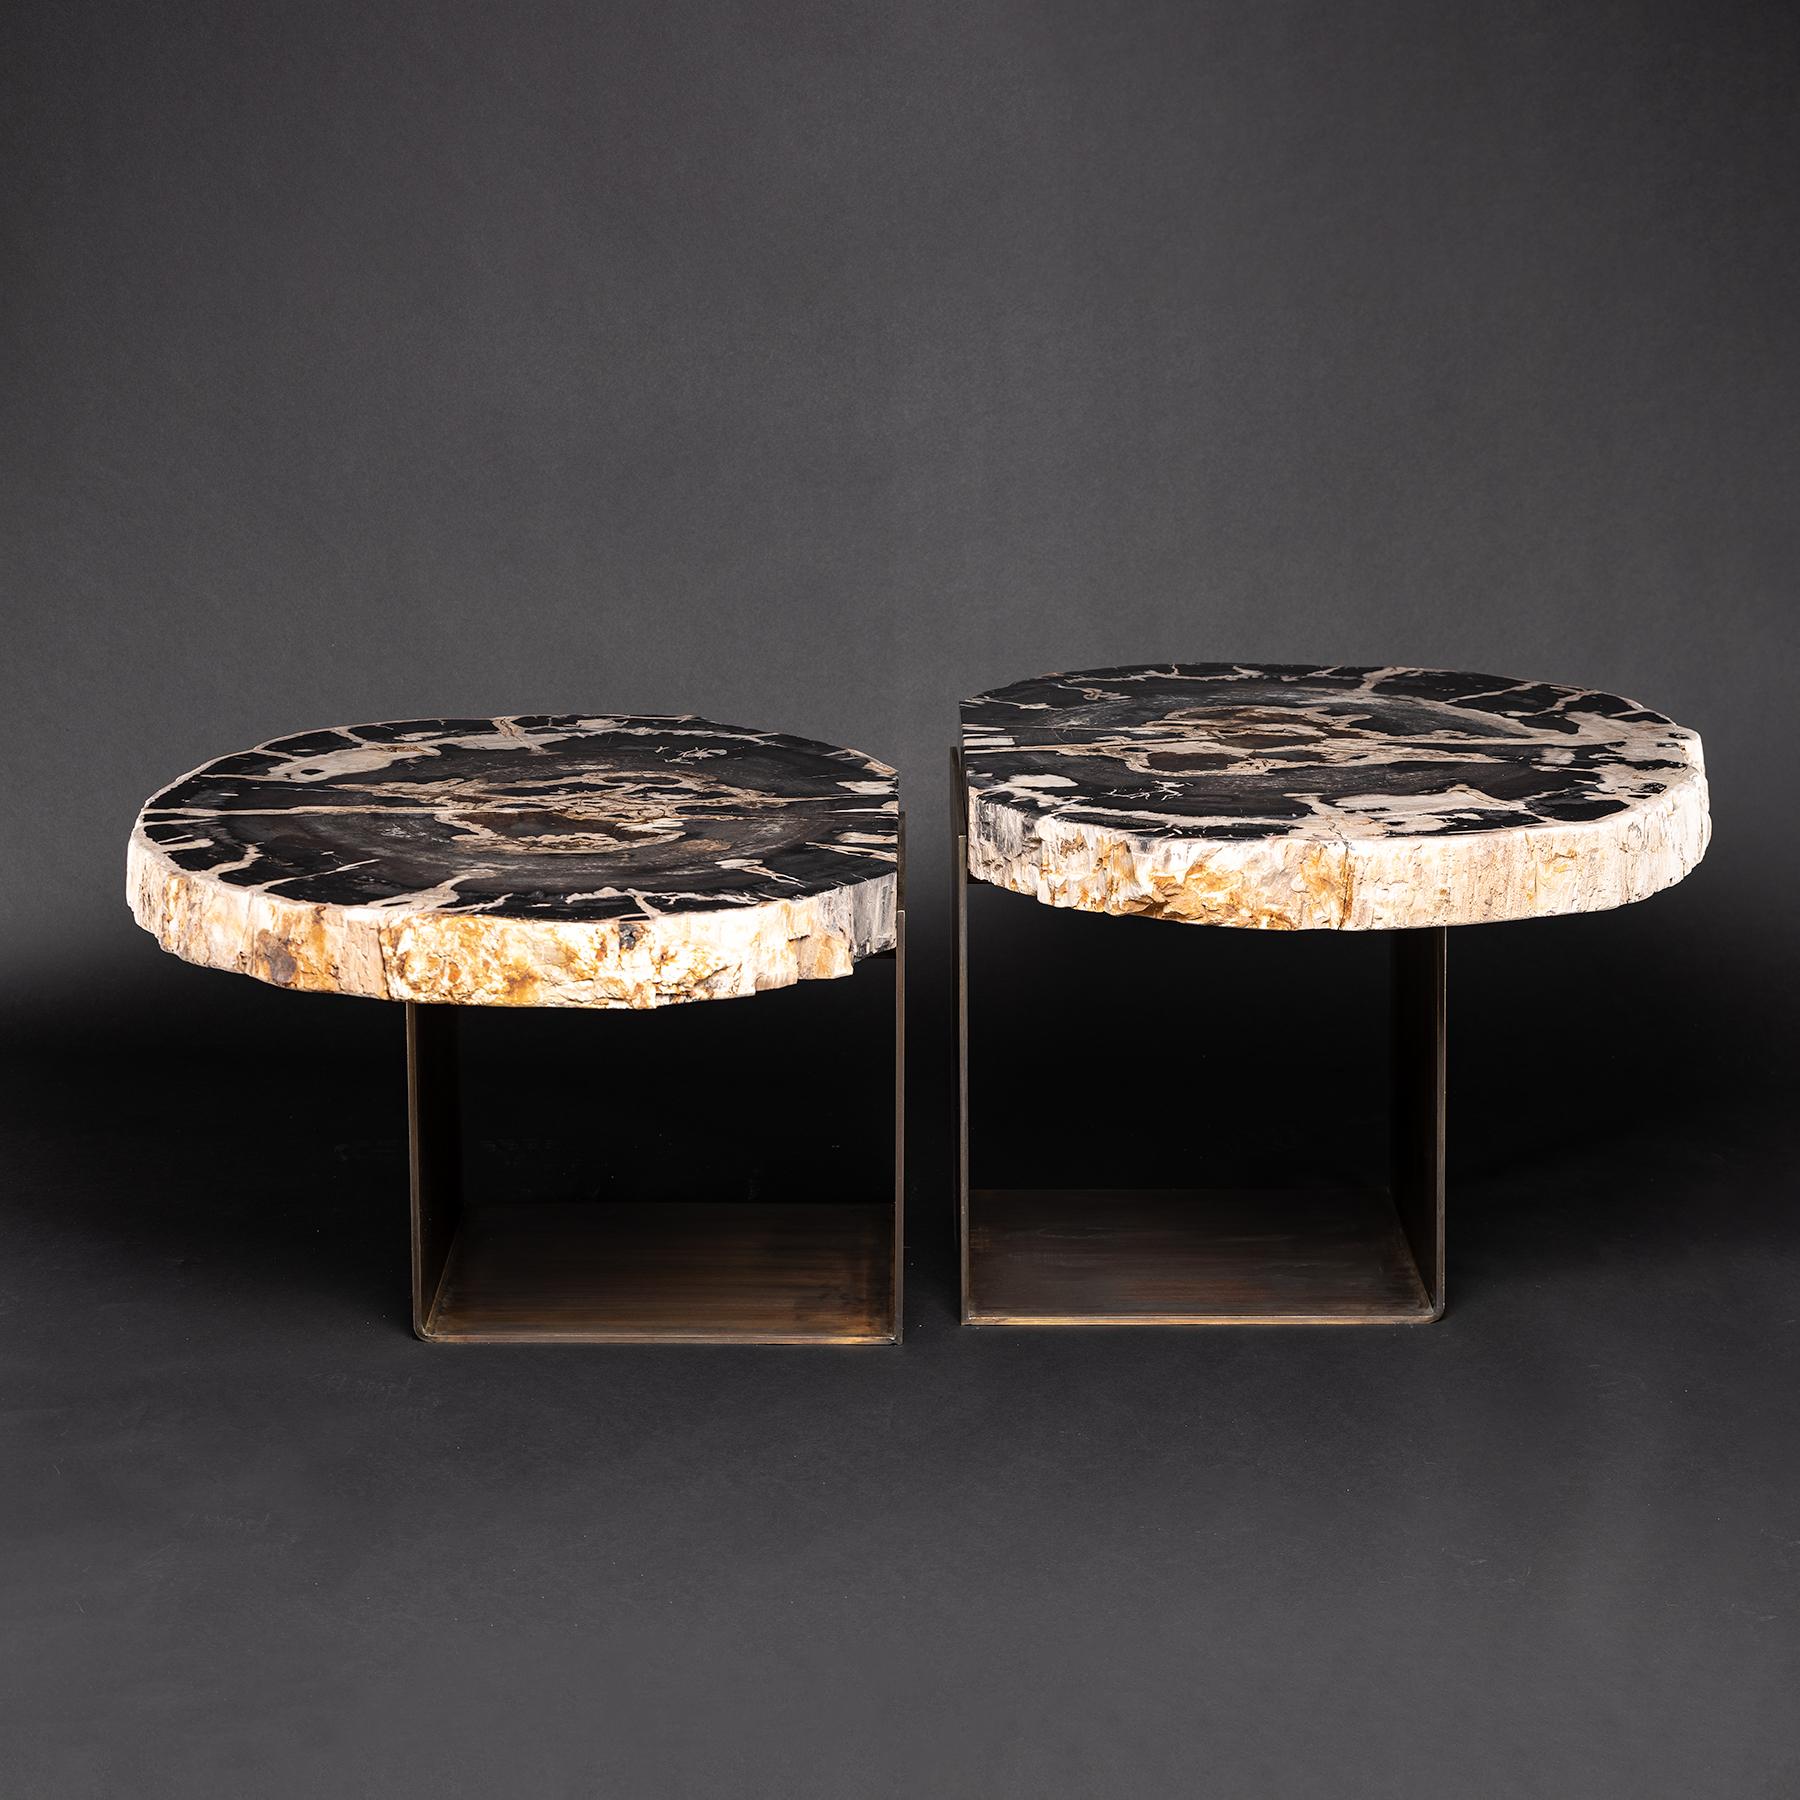 Center table, double petrified wood table with brass-plated antique patina metal base
Source: Java, Indonesia
Wood fossilization is a group of processes where all organic material is replaced by minerals. Petrifaction process occurs underground